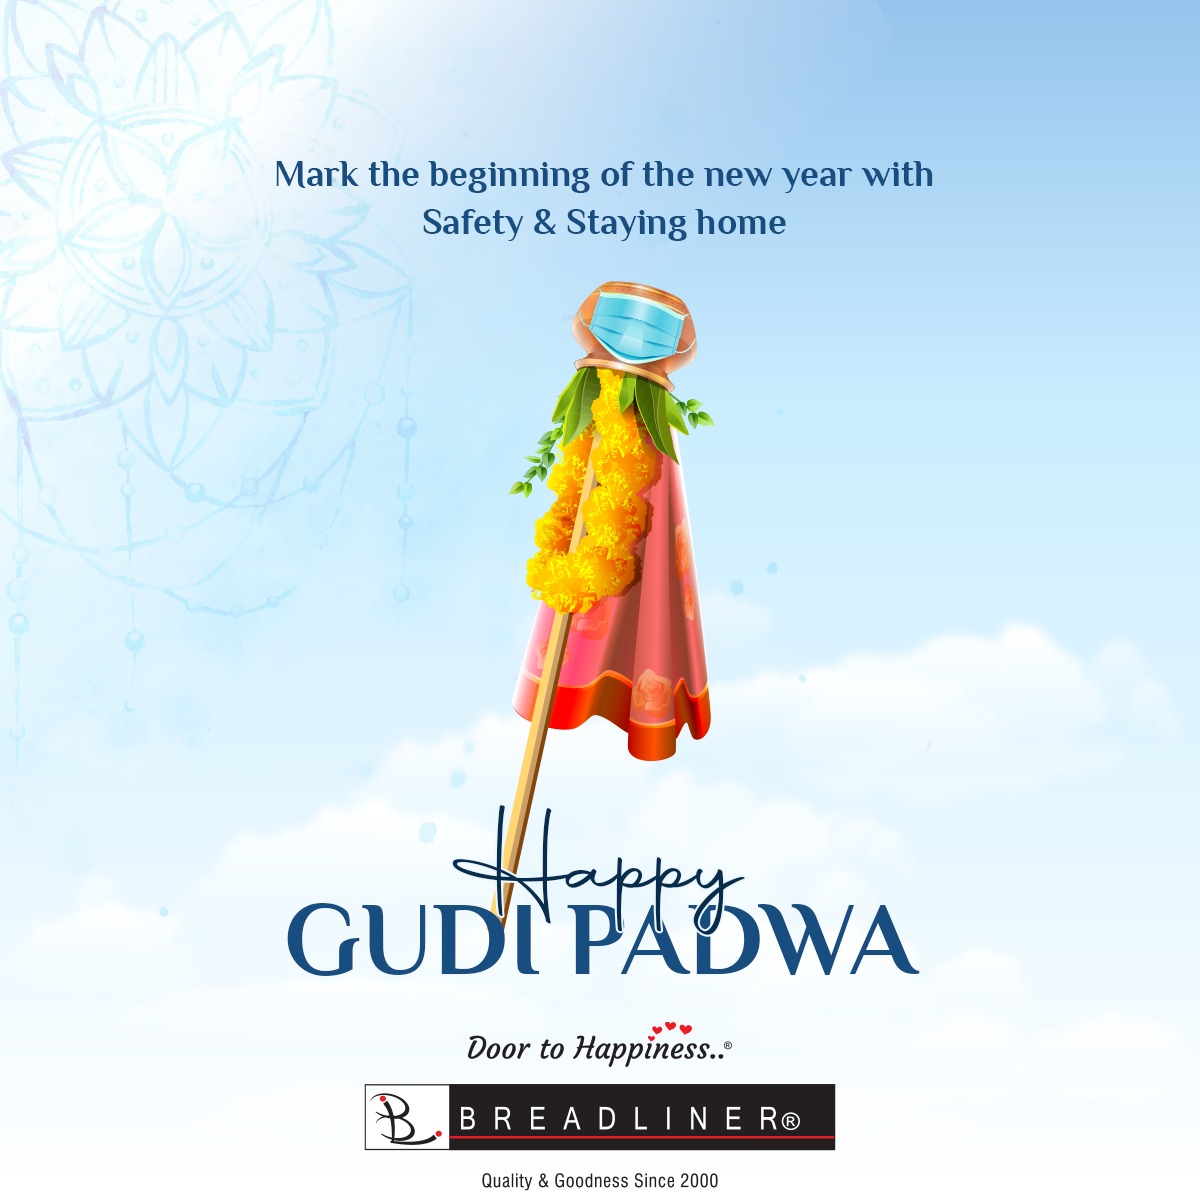 We hope that your life endowed with happiness and a lot of success!  
🌹 Happy Gudi Padwa to you and your family members. 🌹 

#Breadliner #ChooseBl  #gudipadwa2021 #gudipadwaspecial 
#happydays #gudipadwacelebration #newyear